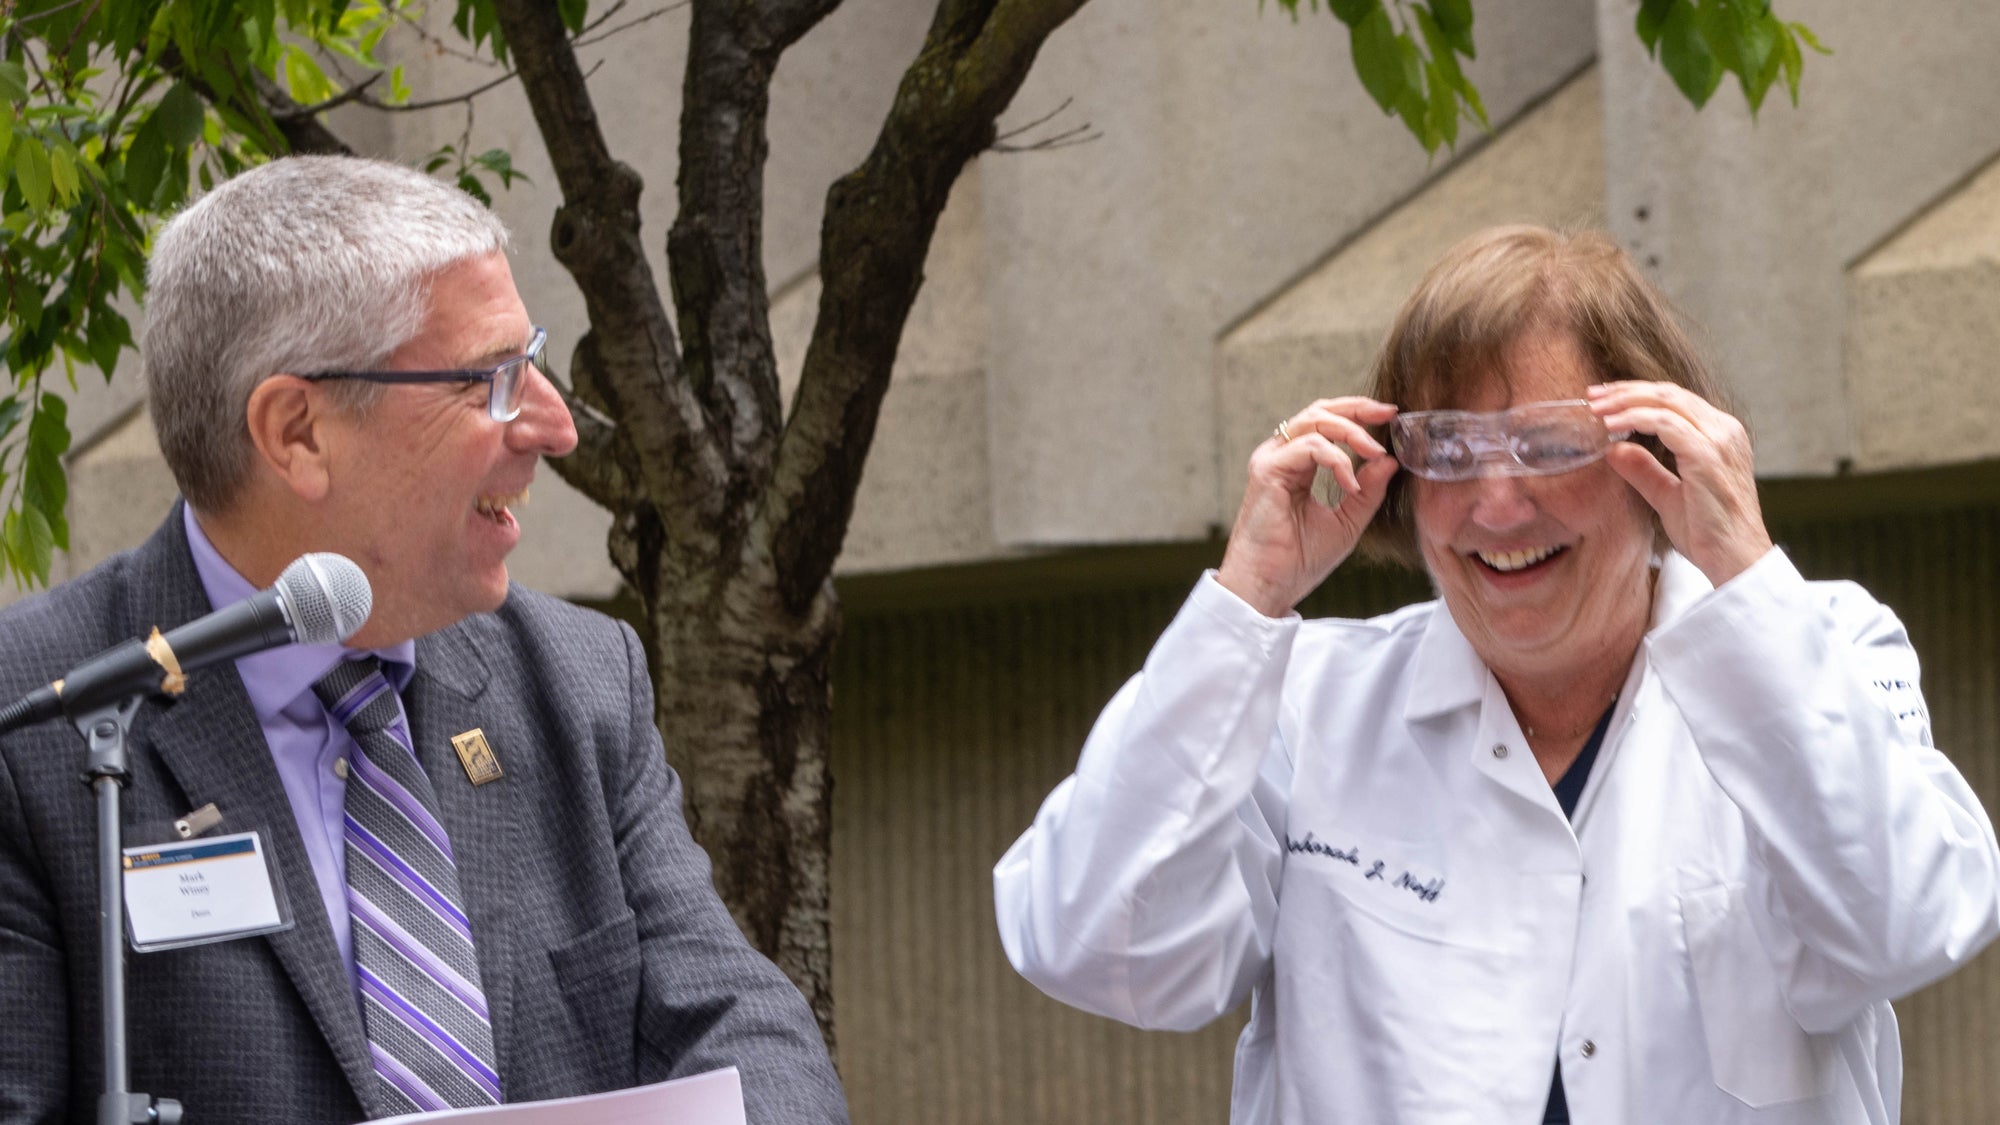 Woman in lab coat adjusts safety glasses, Dean Winey looks on from podium